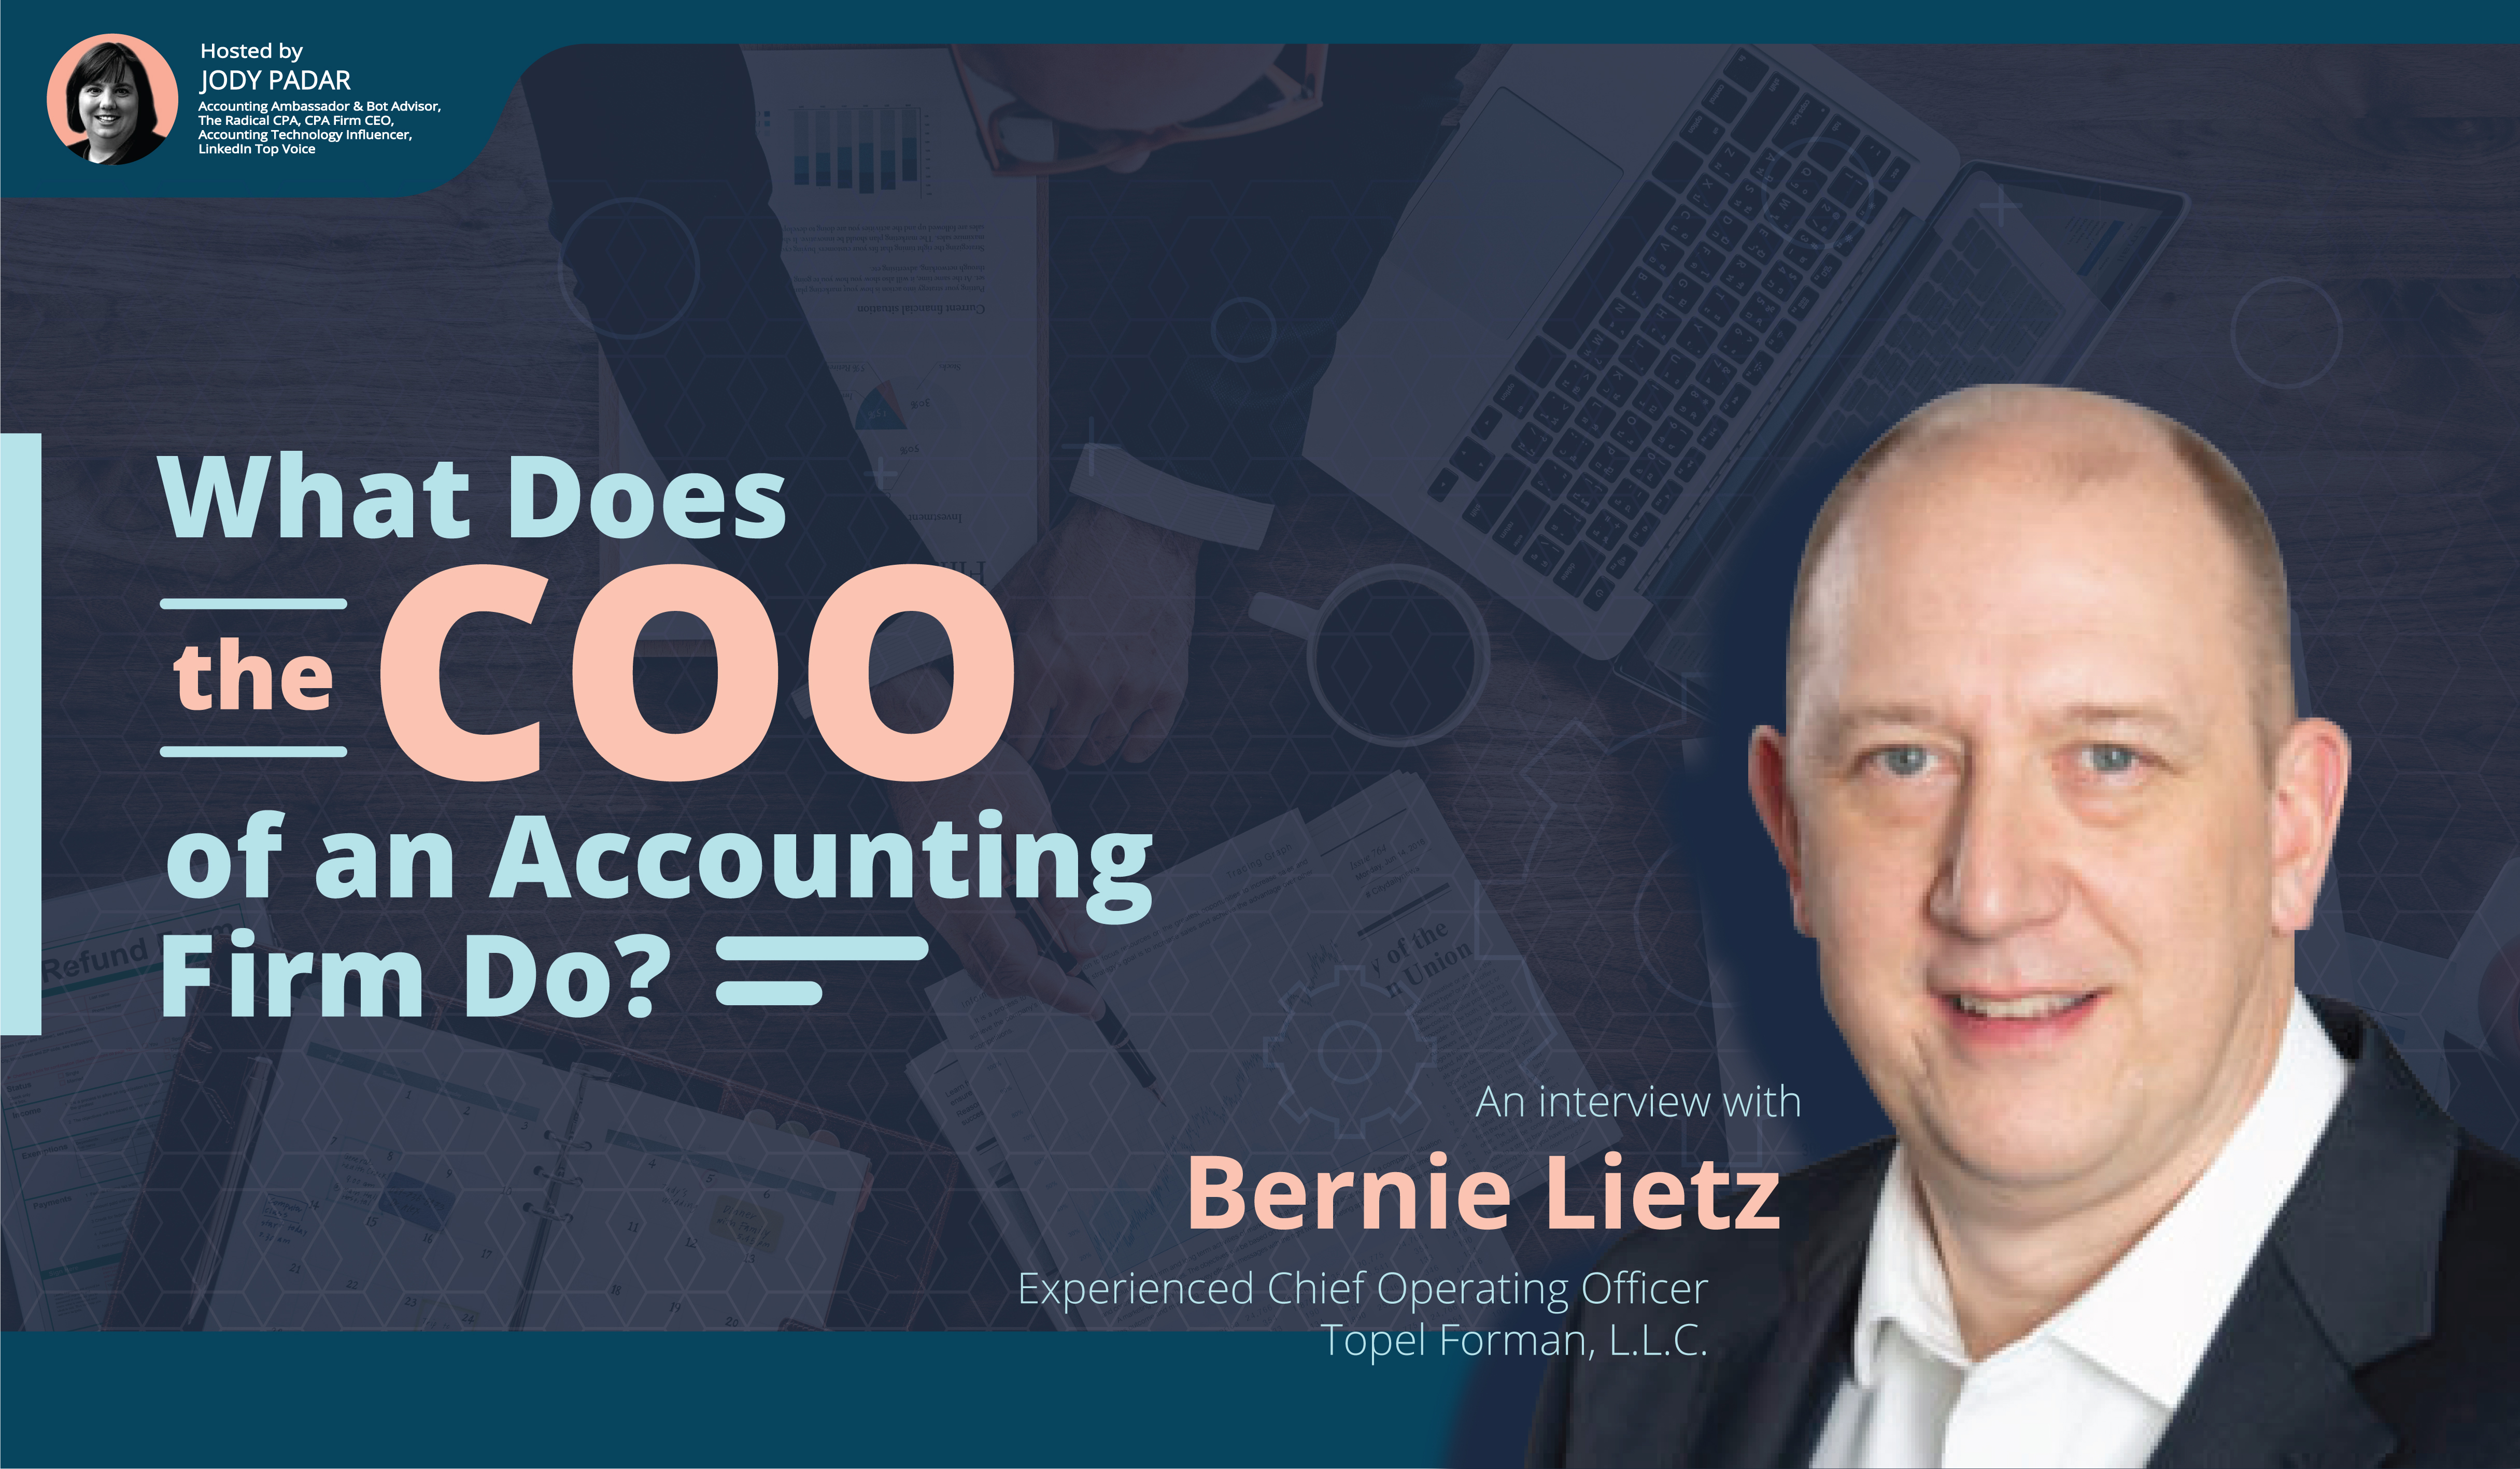 What Does the COO of an Accounting Firm Do?